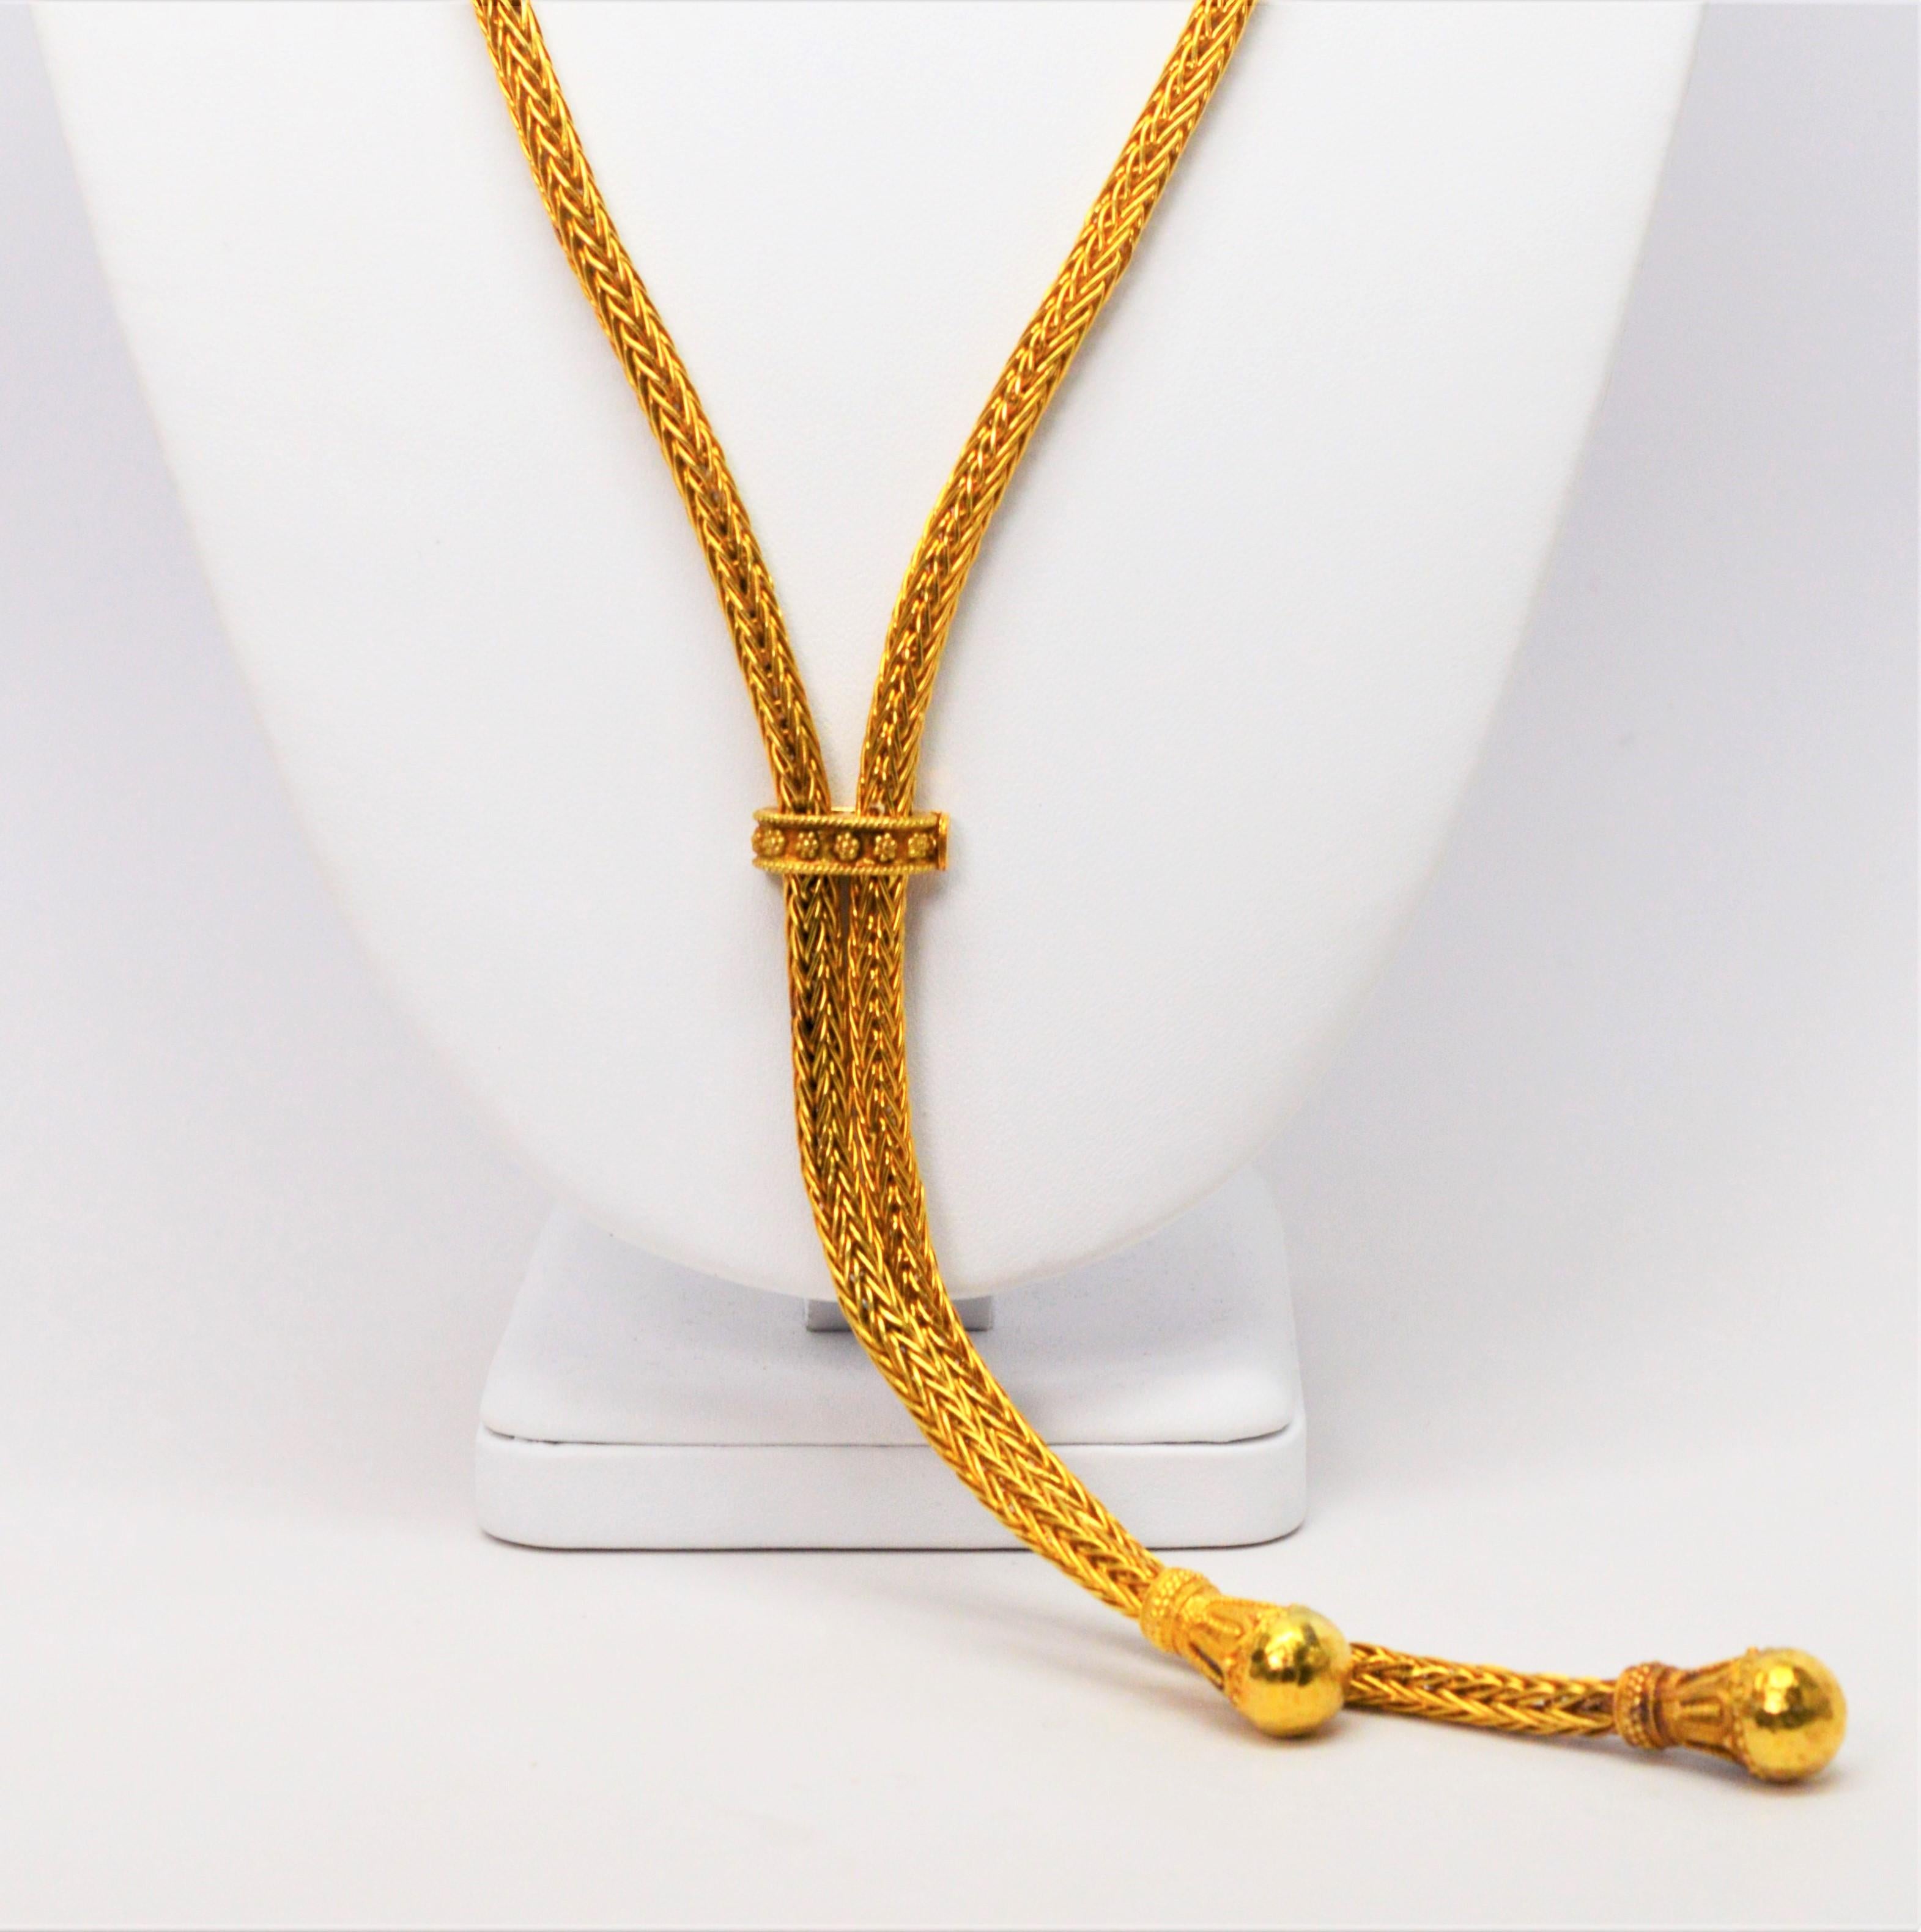 Truly a statement piece, in brilliant eighteen karat 18K yellow gold, this substantial woven rope chain is thirty three inches in length and is outfitted with an adjustable decorative gold slide creating a lariat style necklace. Each end of the 5mm